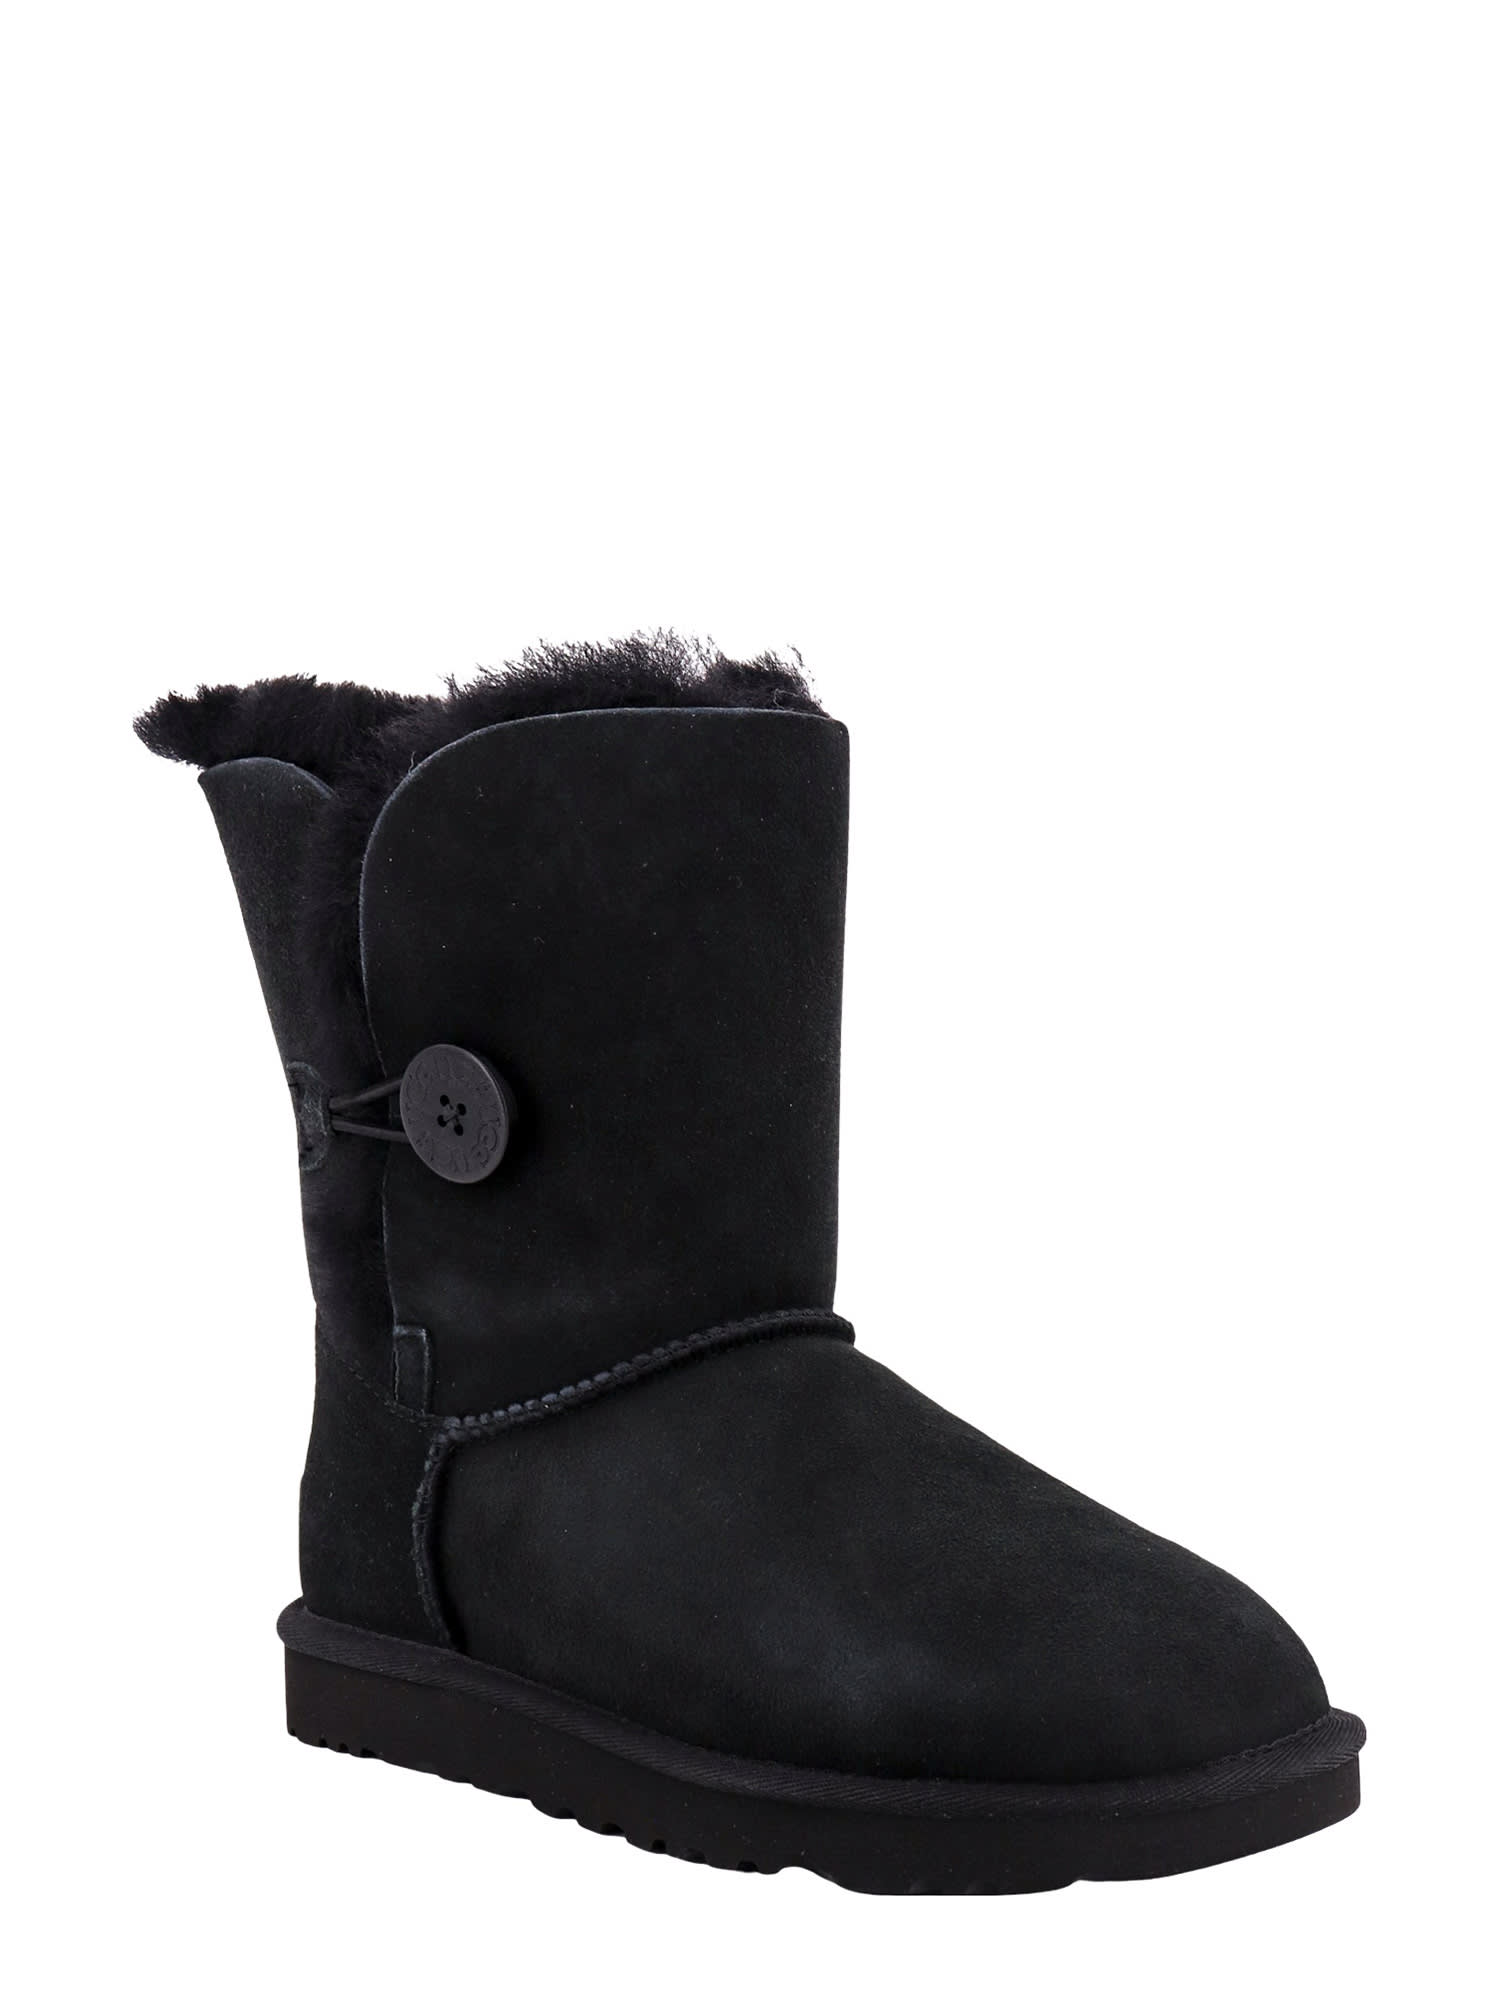 Shop Ugg Bailey Button Boots In Black